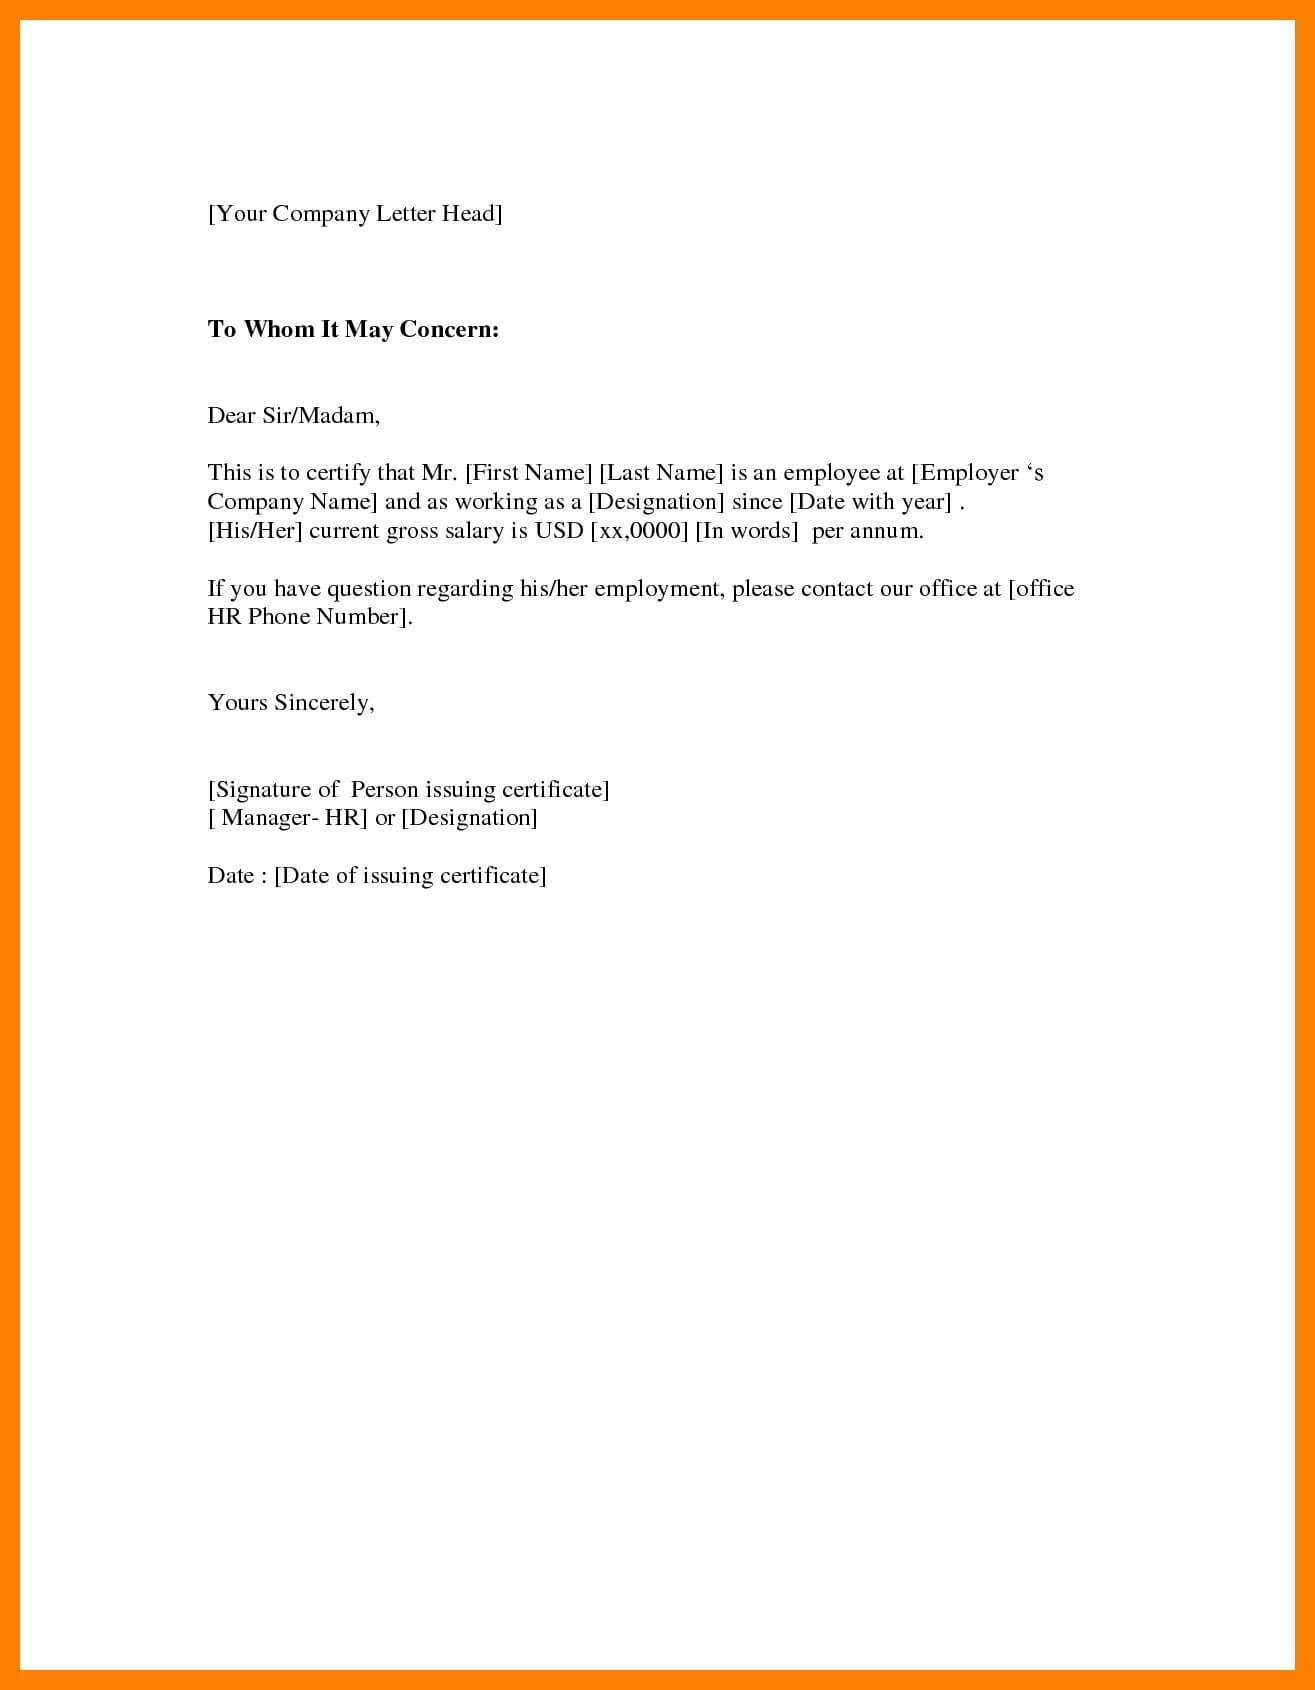 046 Certificate Of Employment Template Ideas Employee The With Certificate Of Service Template Free